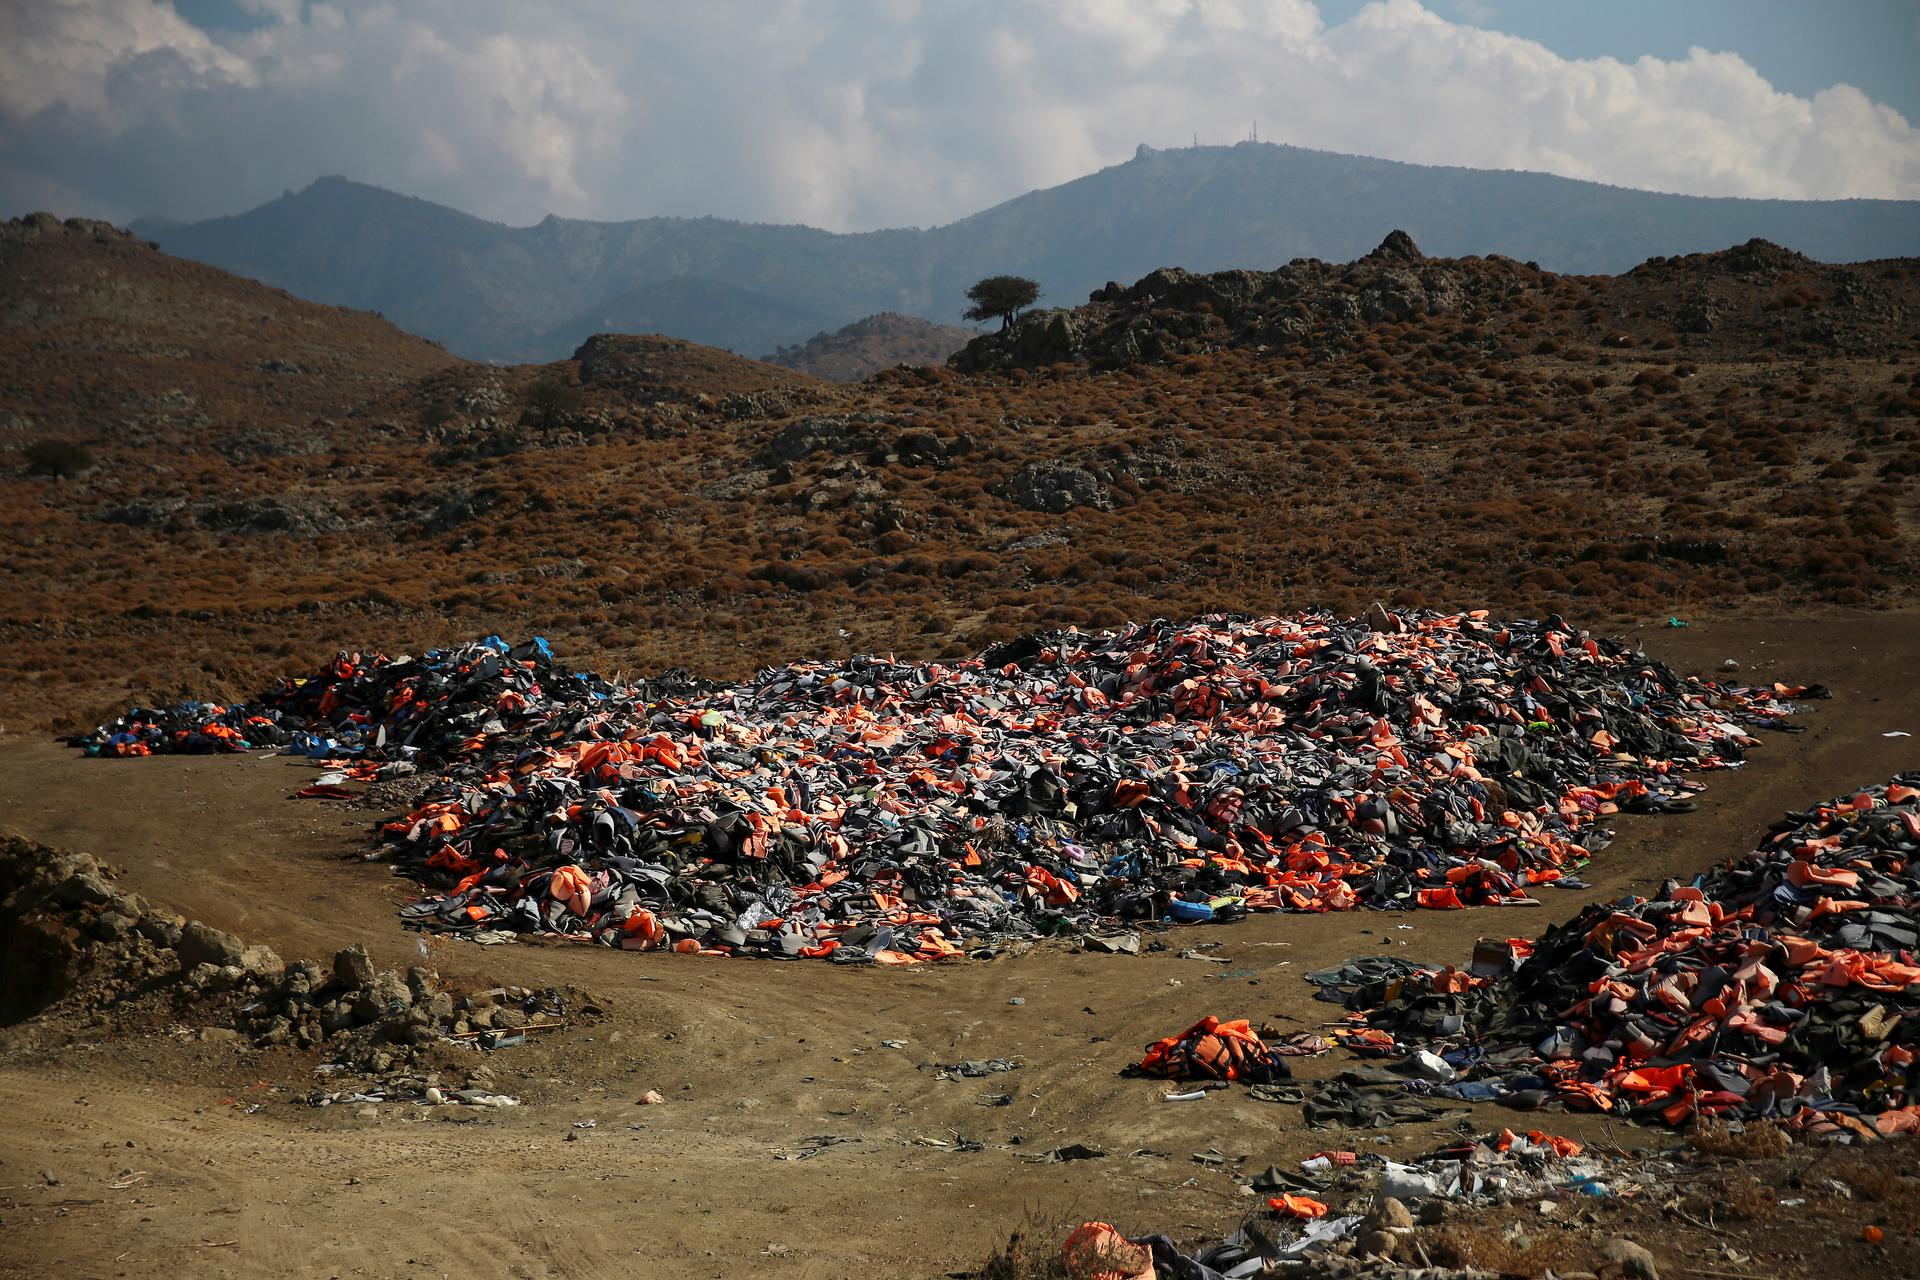 Thousands of lifejackets left by migrants and refugees are piled up at a garbage dump site near the town of Molyvos on Lesbos, Oct. 5, 2016.